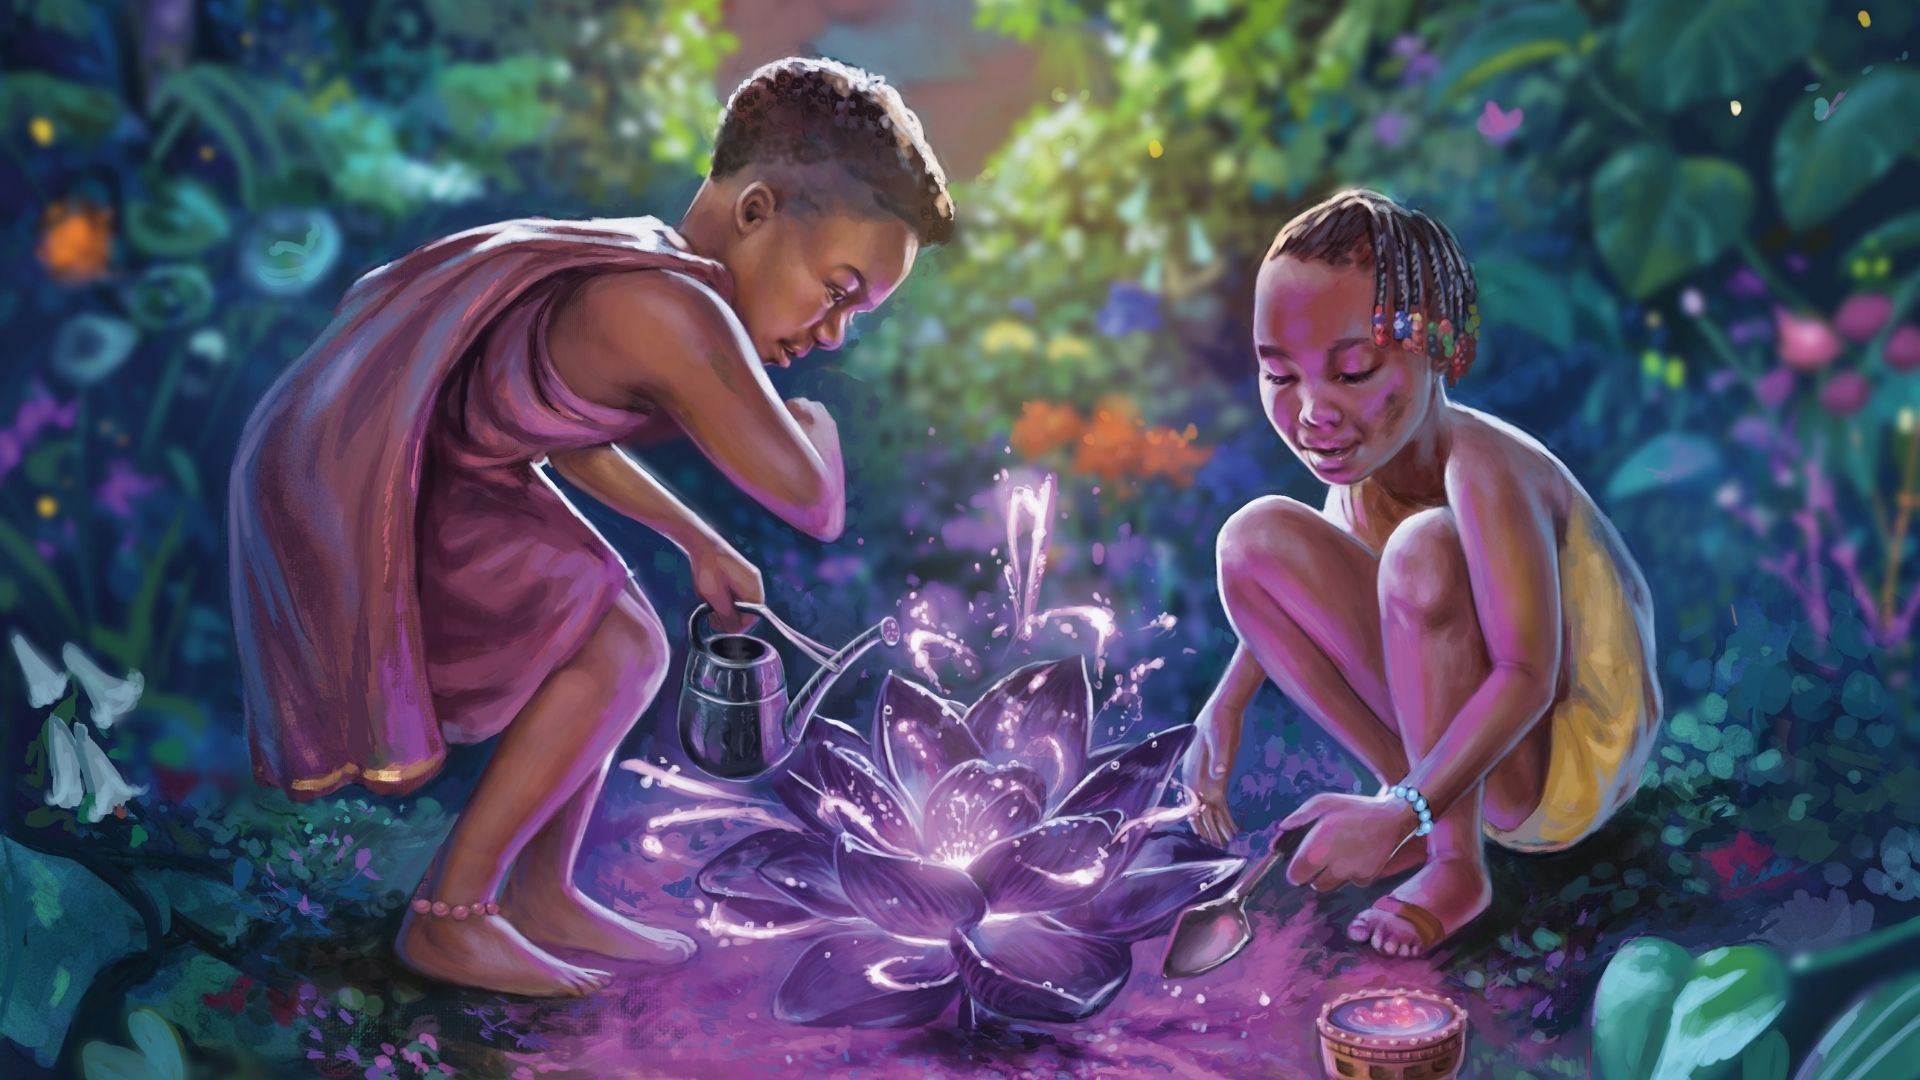 The Black Is Magic variant of Cultivate. I would be proud to hang this art on my wall. (Image: Hillary Wilson / Wizards of the Coast)